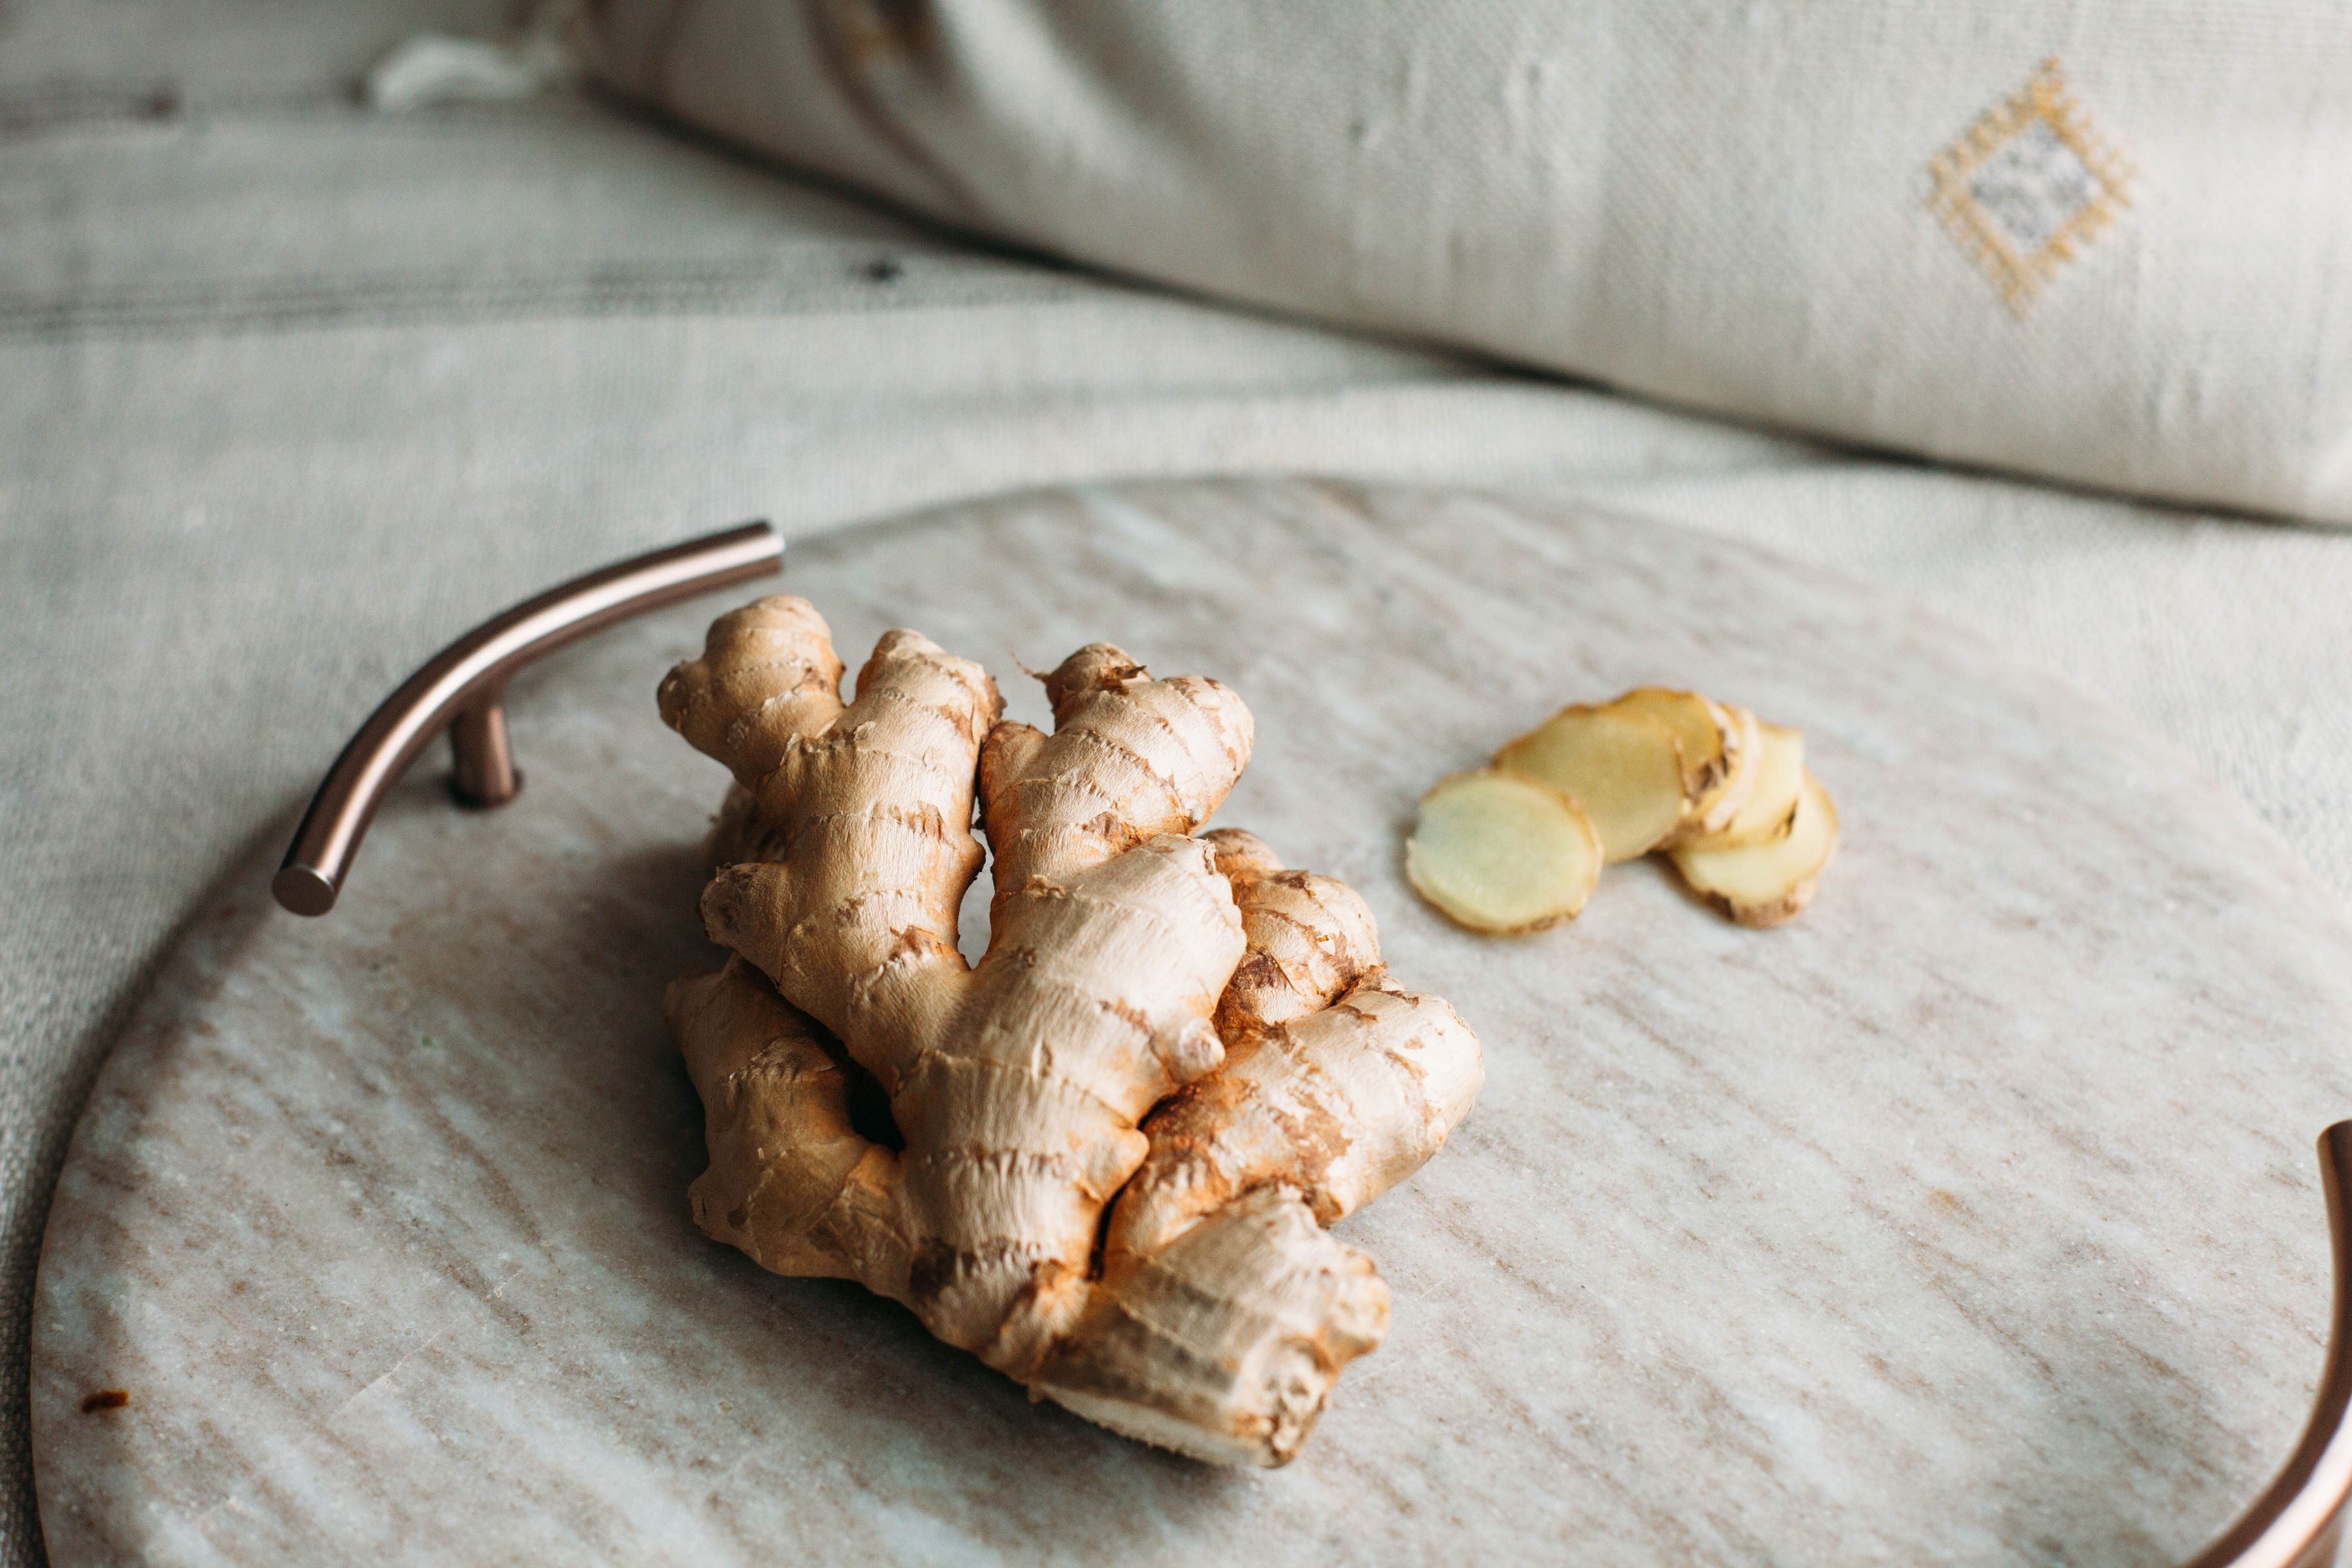 a clump of ginger root